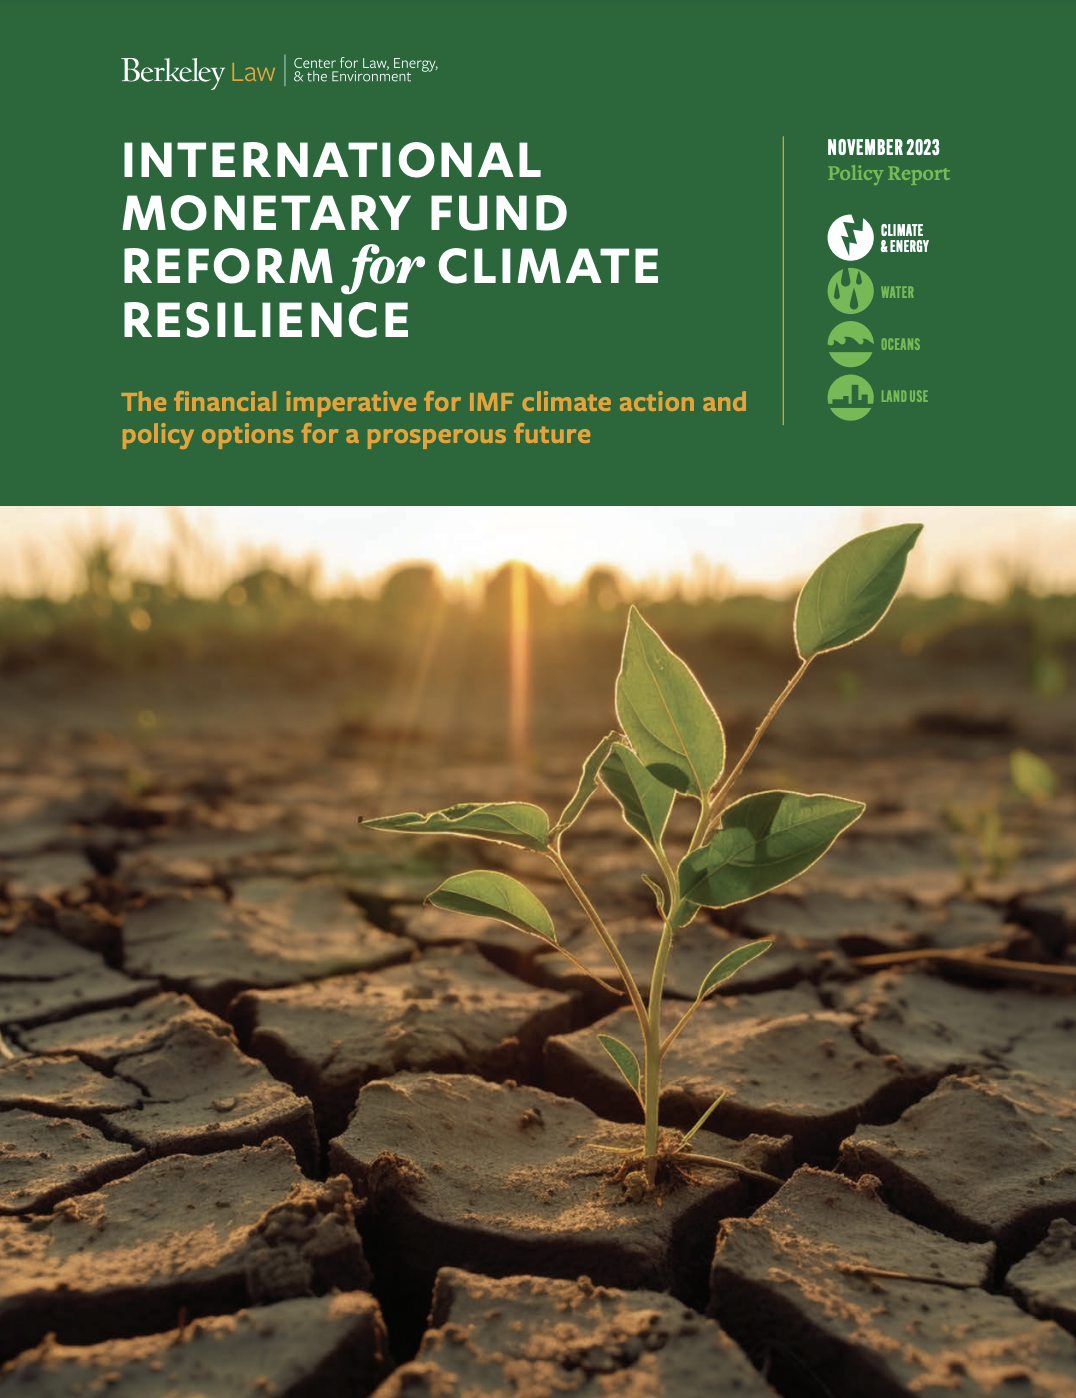 International Monetary Fund Report for Climate Resilience cover image of a sprouting plant 